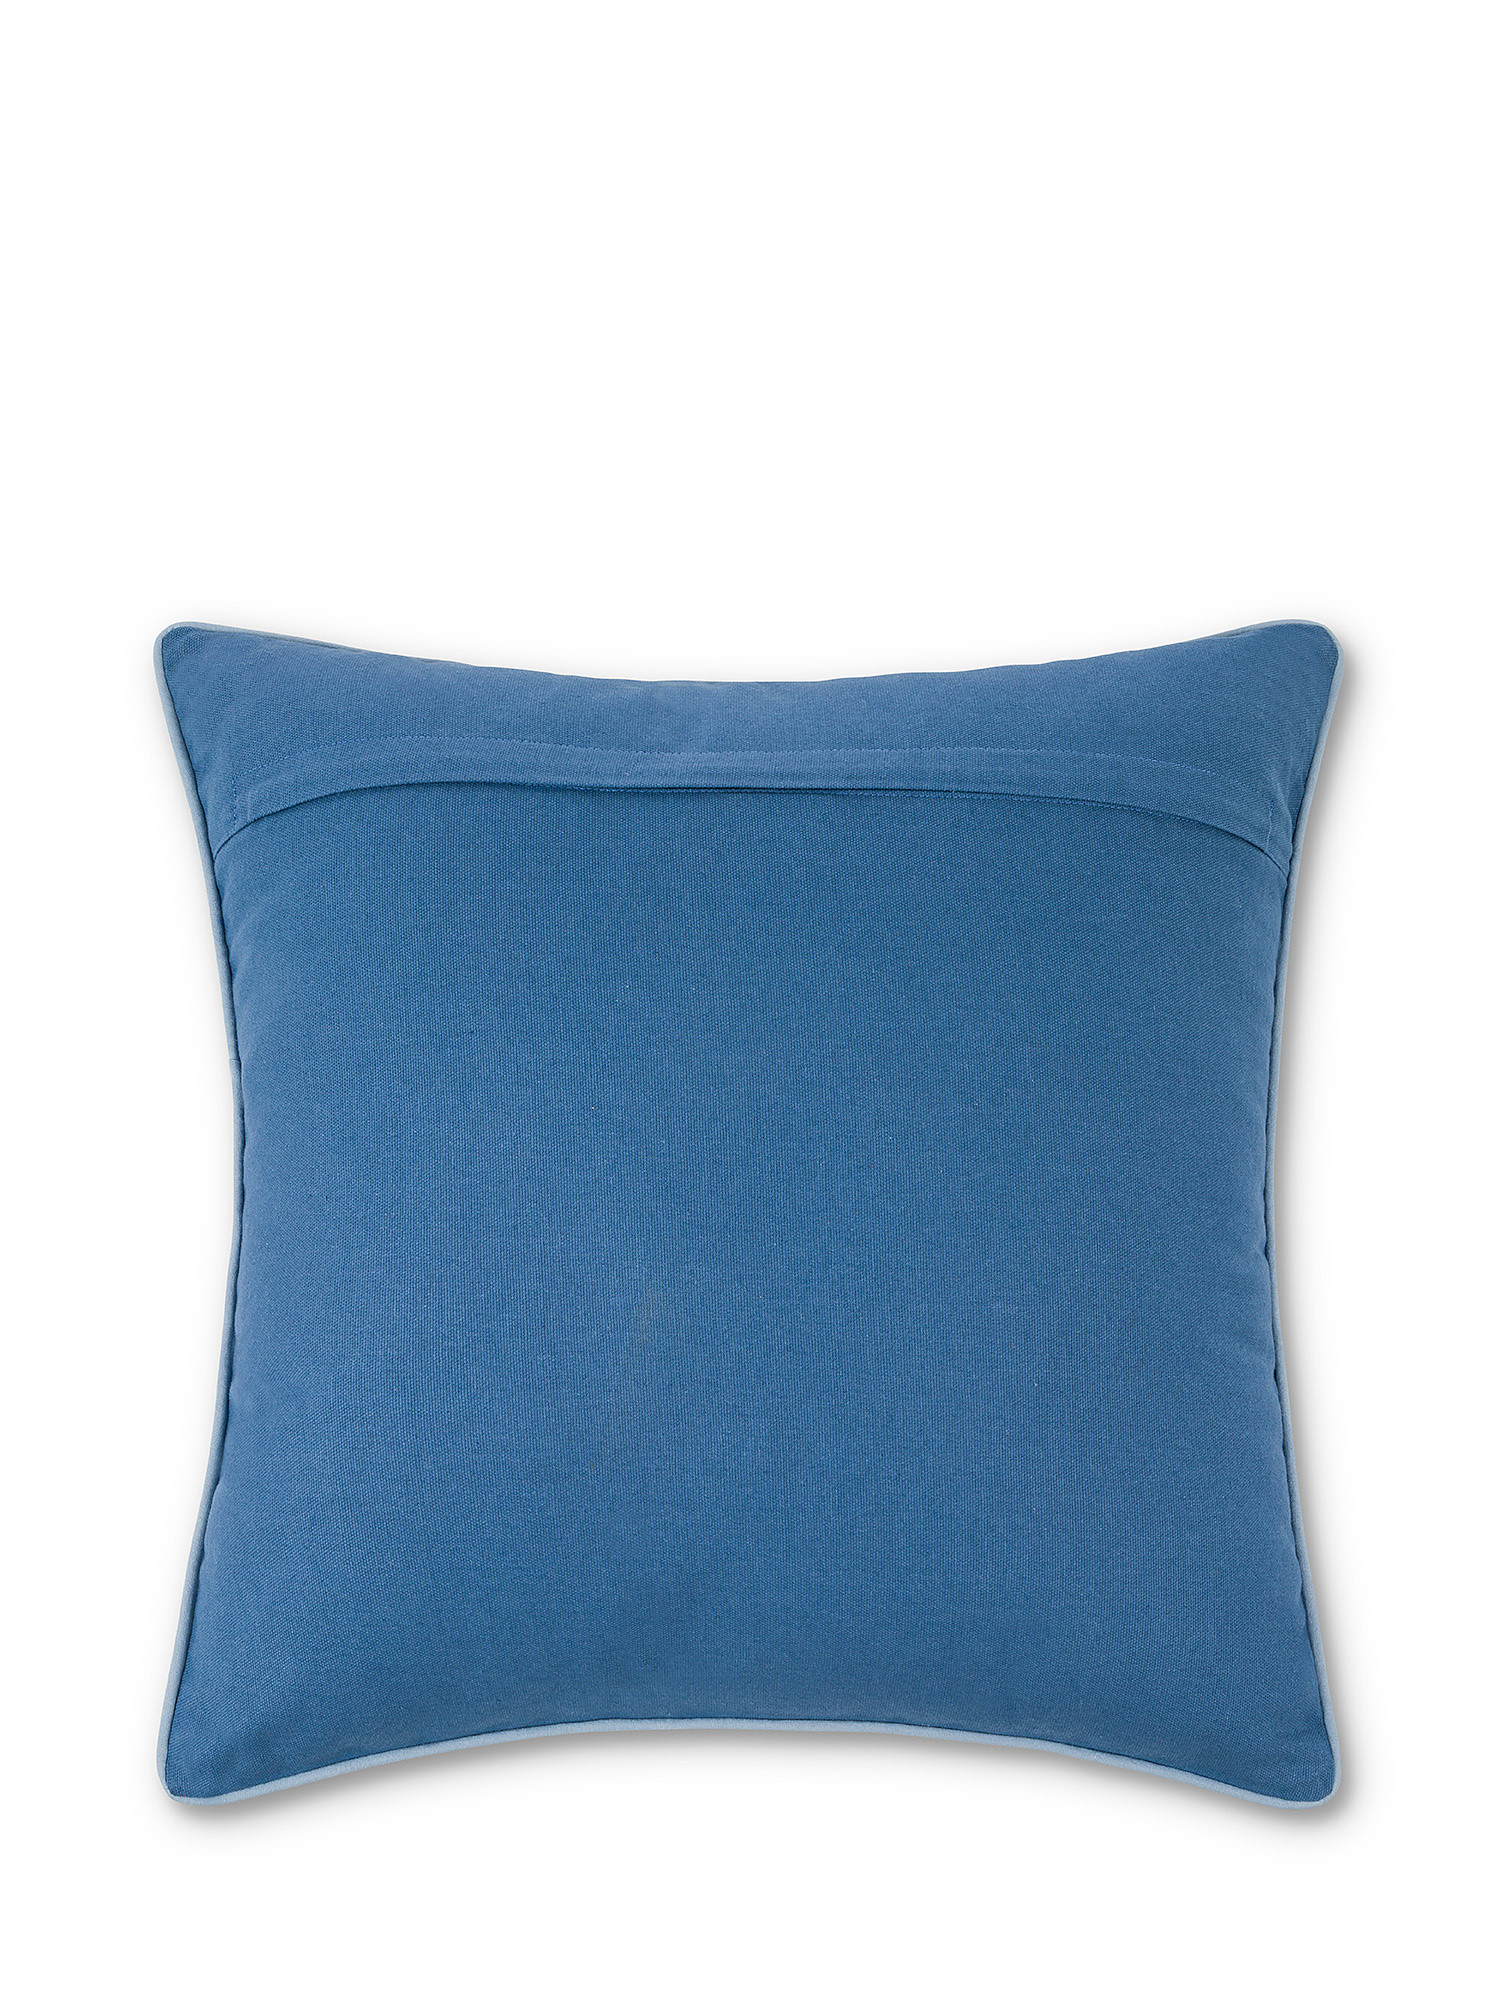 Cotton cushion with fish applications 45x45cm, Blue, large image number 1